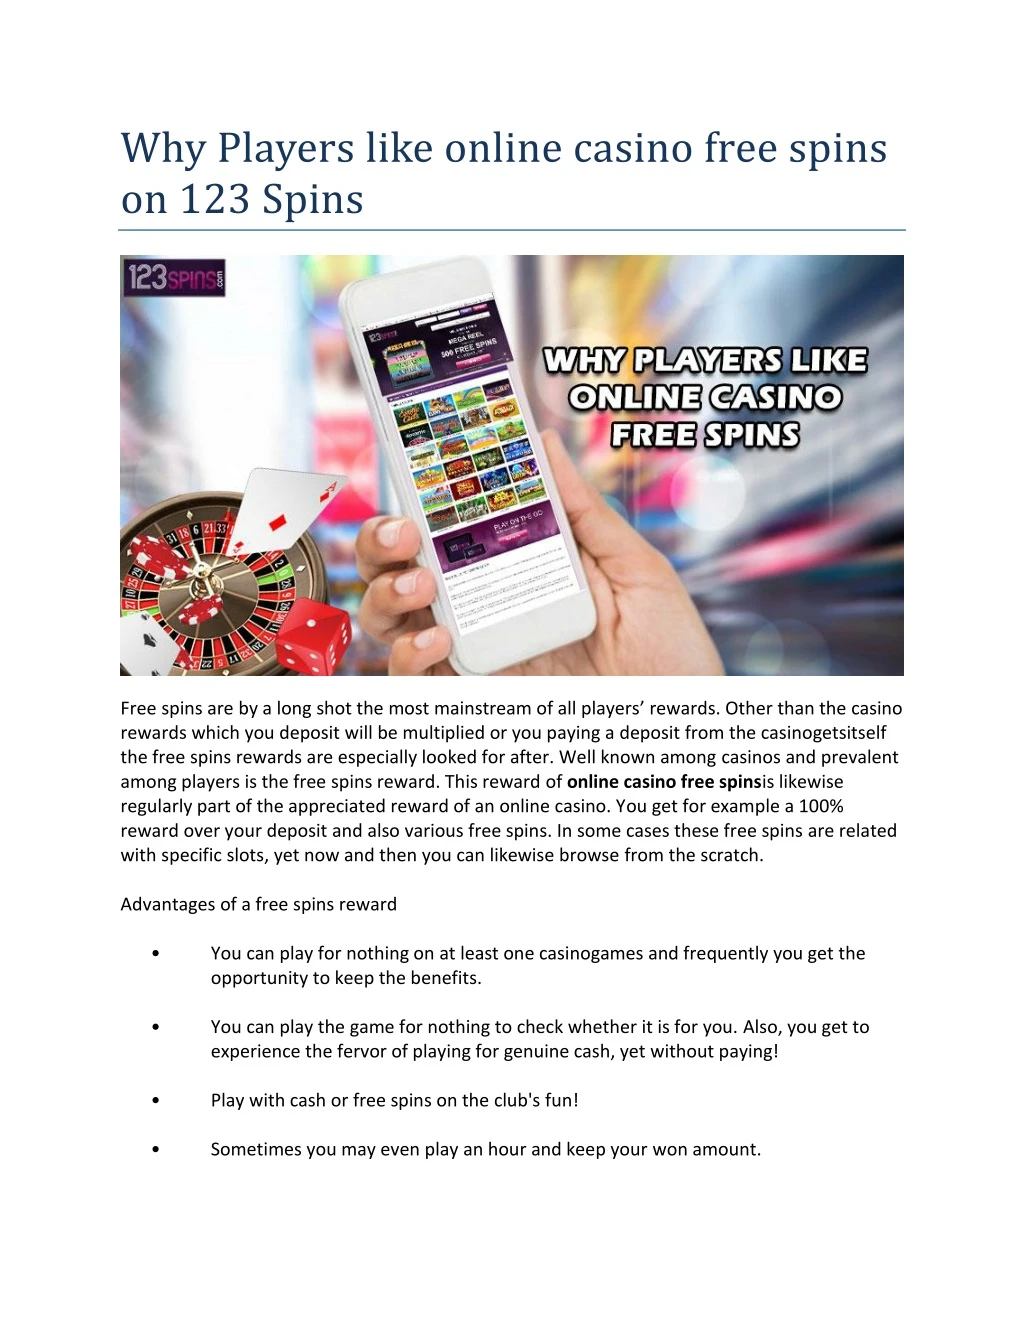 why players like online casino free spins